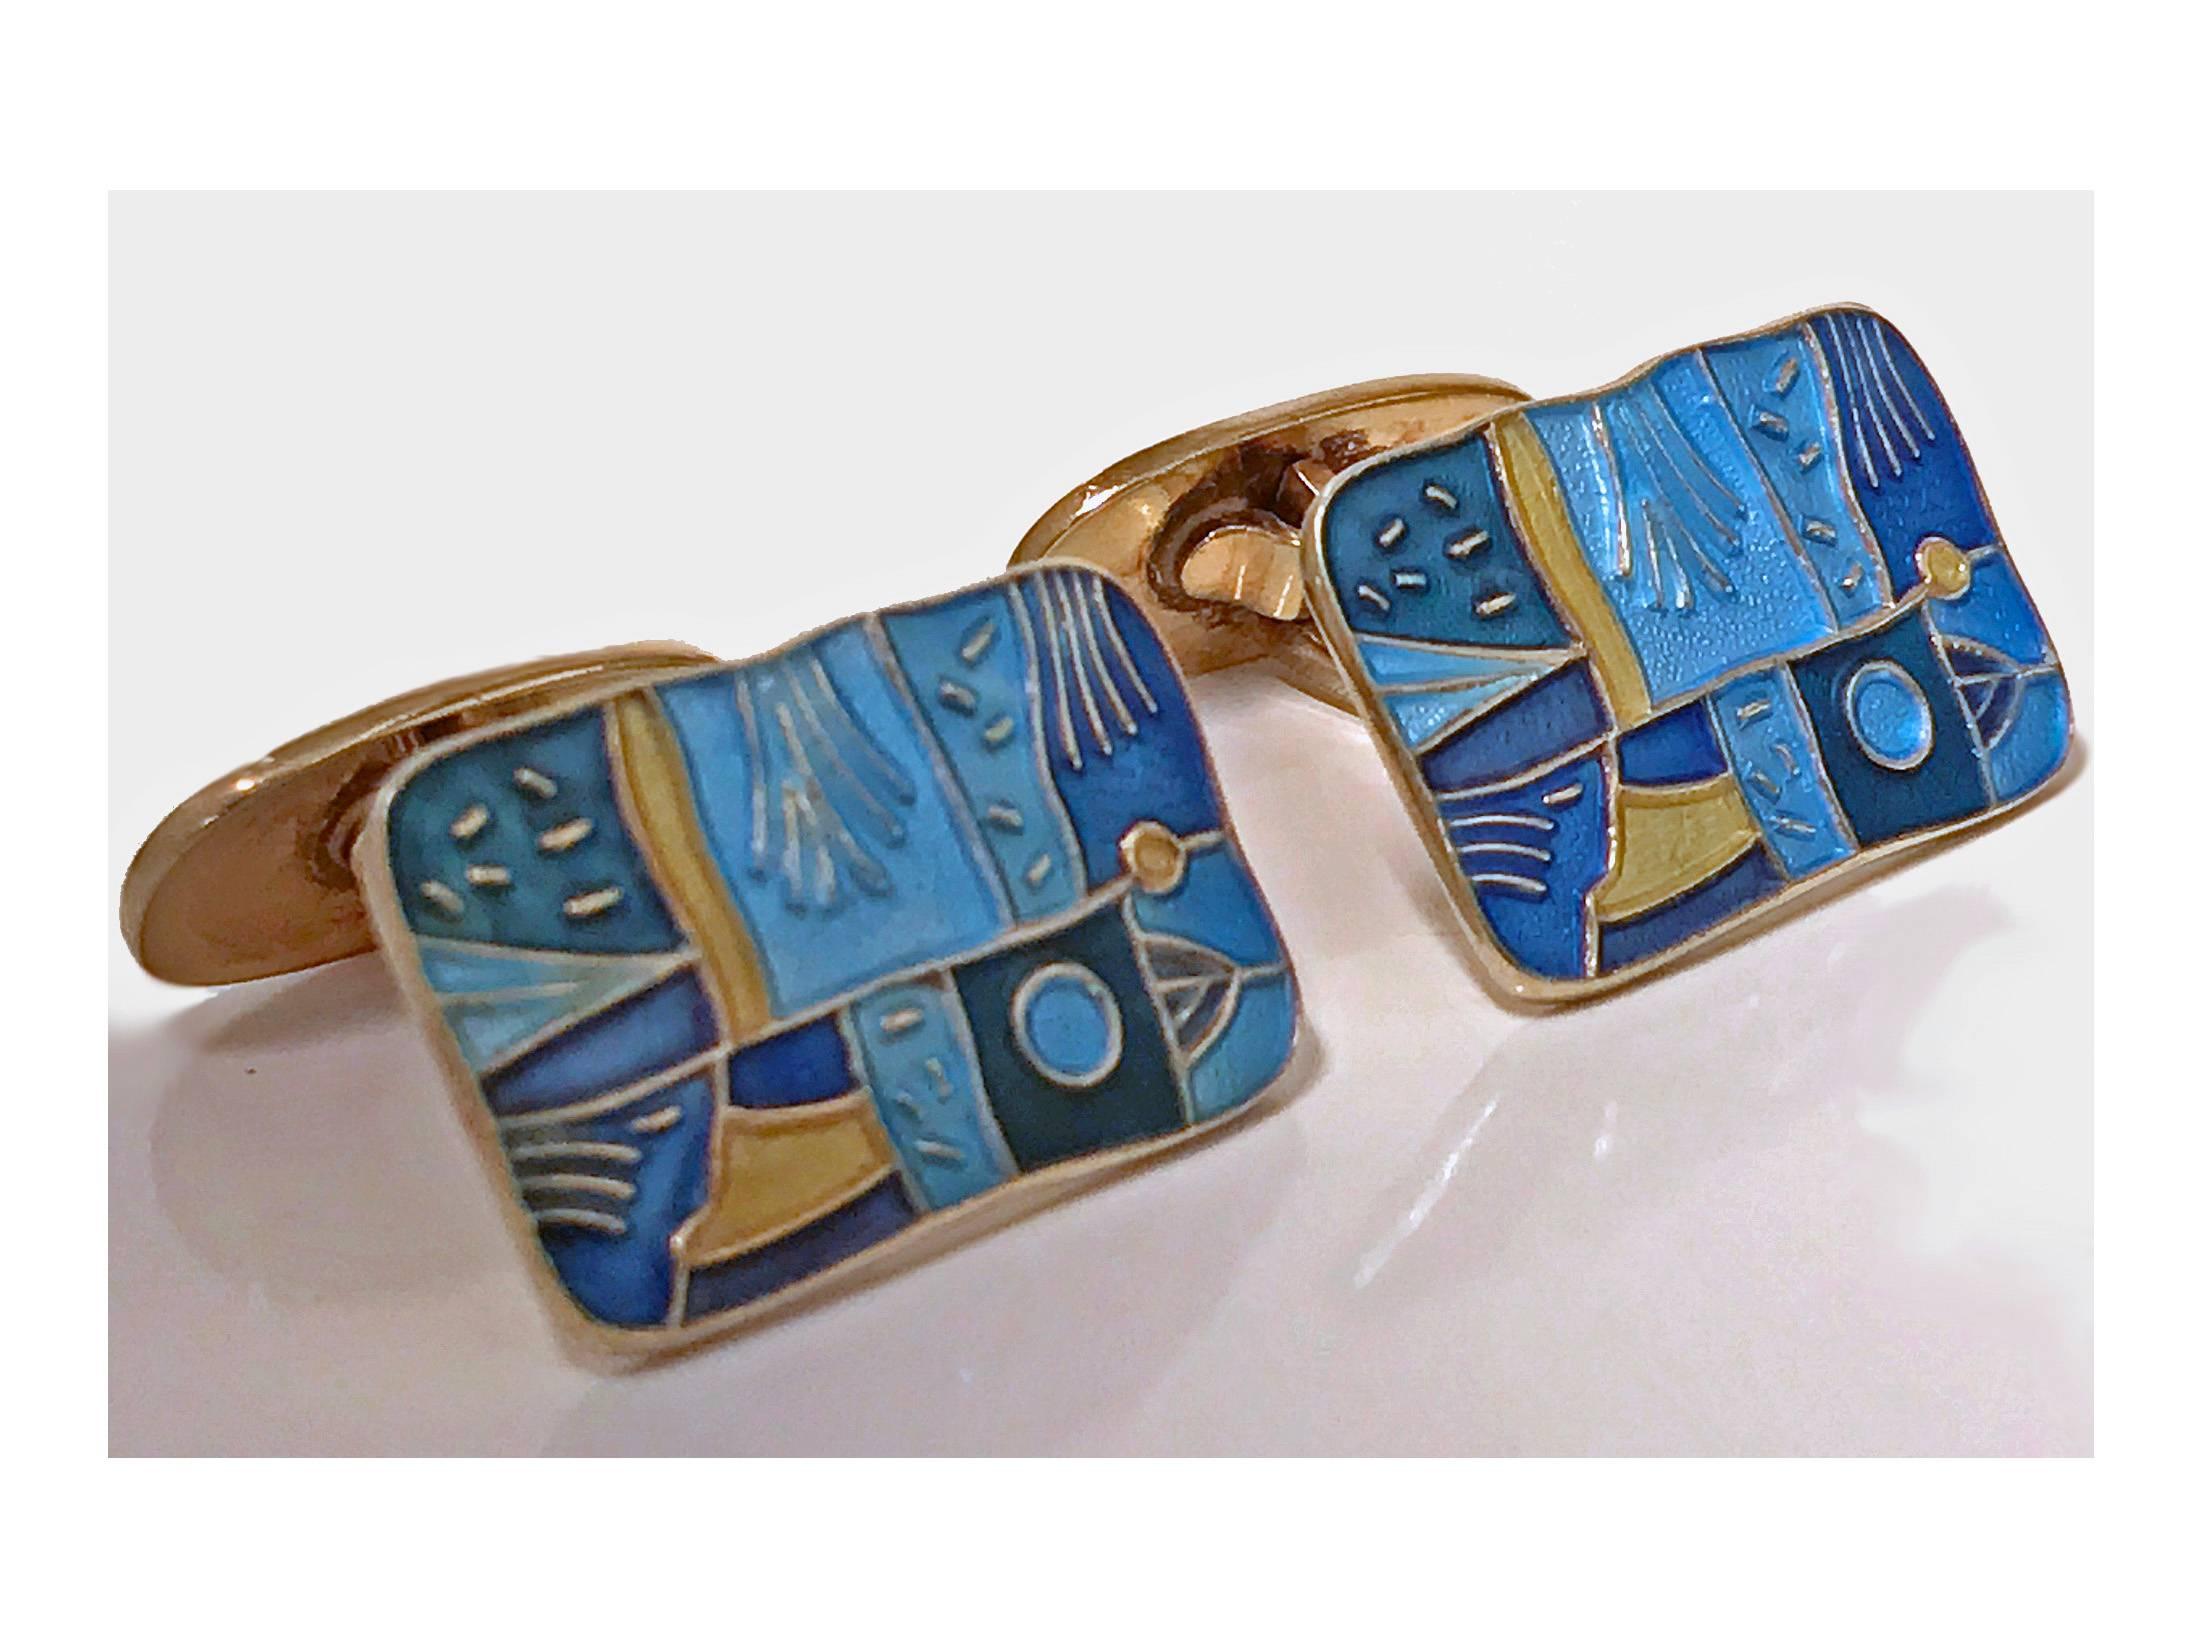 Pair of enamel and sterling silver with vermeil finish Spring' cufflinks, Oslo, Norway, circa 1959, David Andersen. The cufflinks of rectangular shaped form inlaid with a varied blue and gold enamel colors of an art style. Hinged oval back. Fully